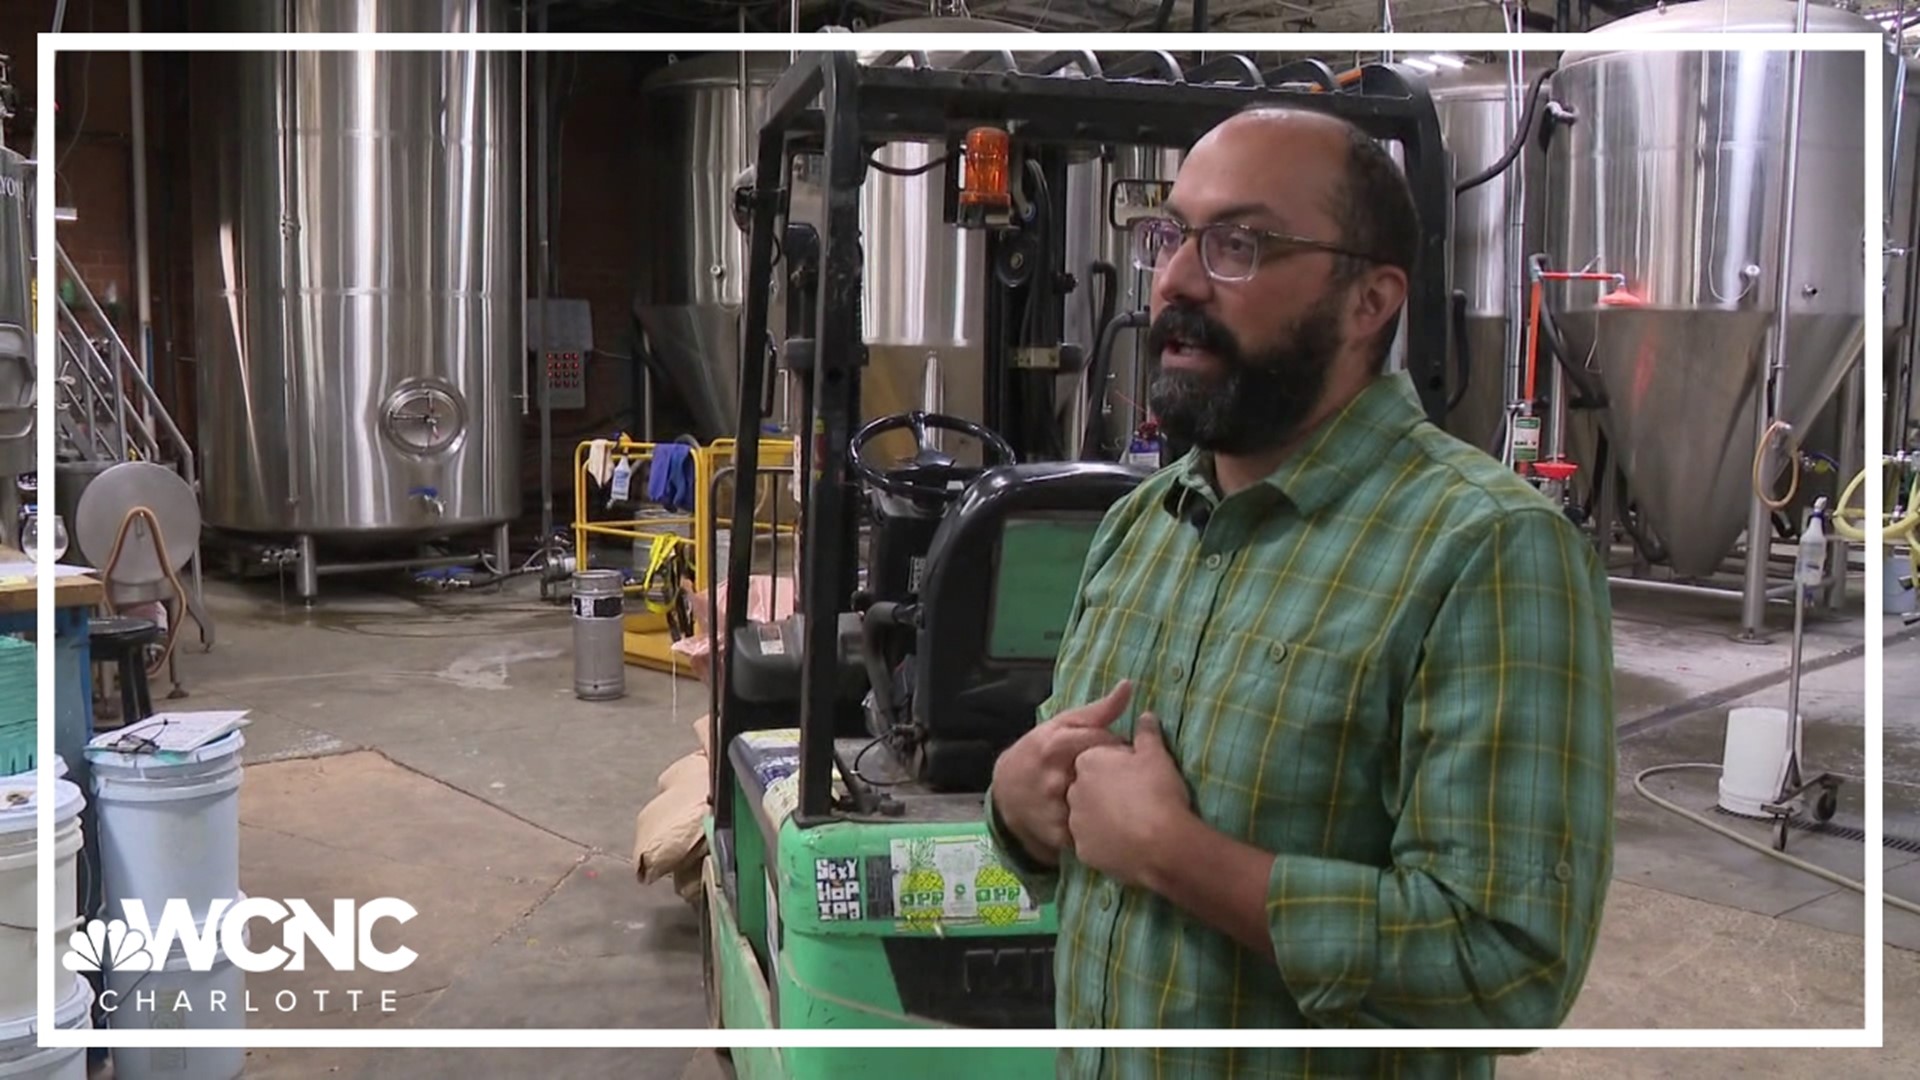 A brewery in Charlotte is working to lessen its carbon footprint while putting out tasty beer.